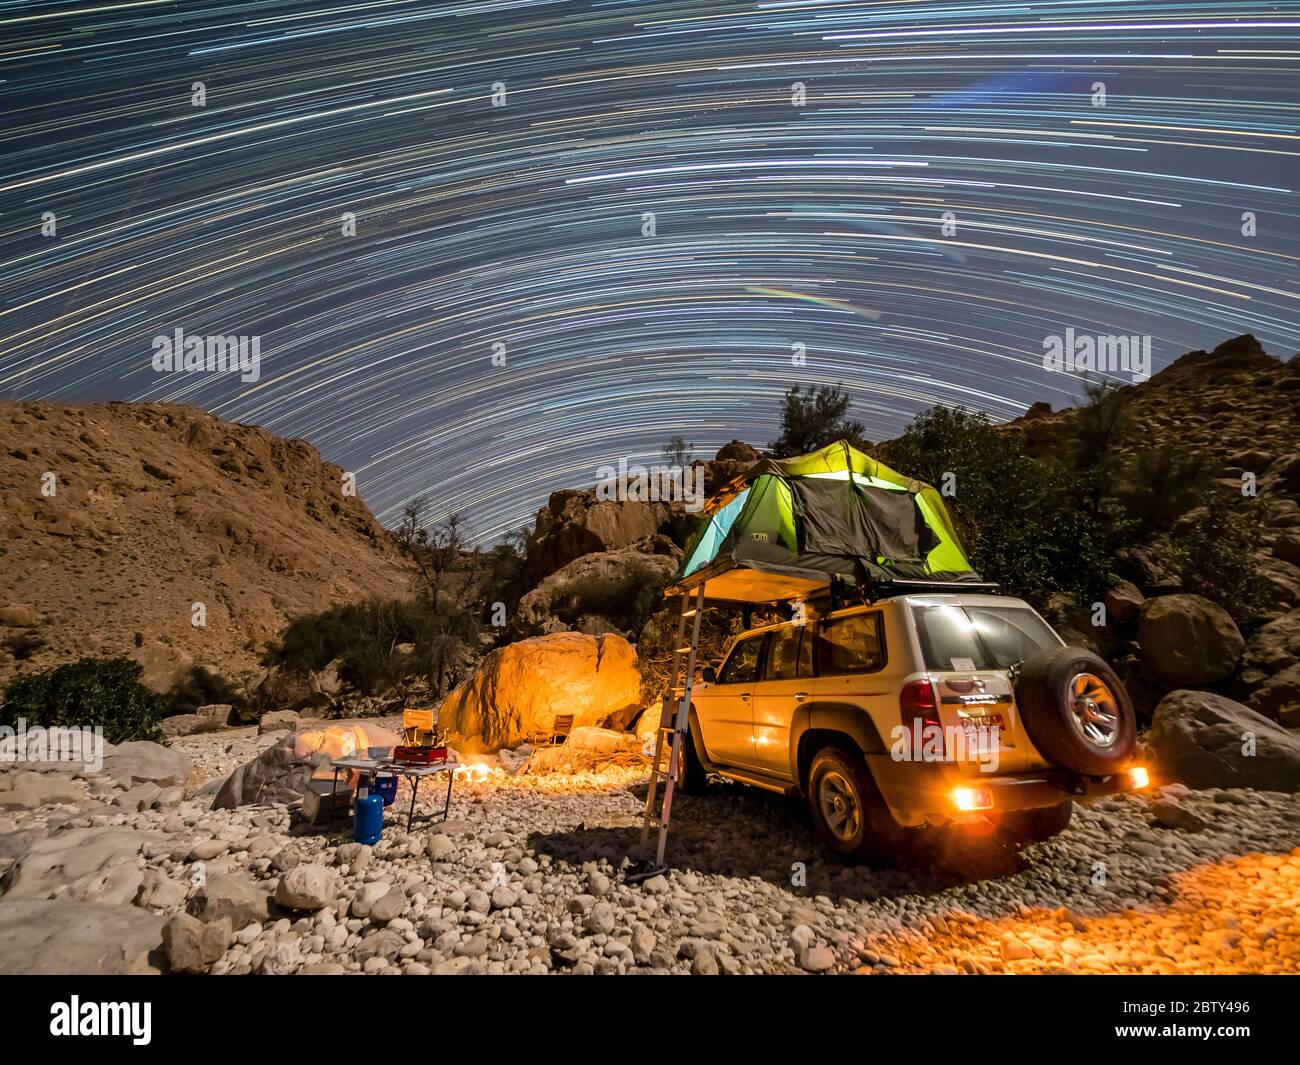 Camping out under the stars in the Sultanate of Oman, Middle East Stock Photo